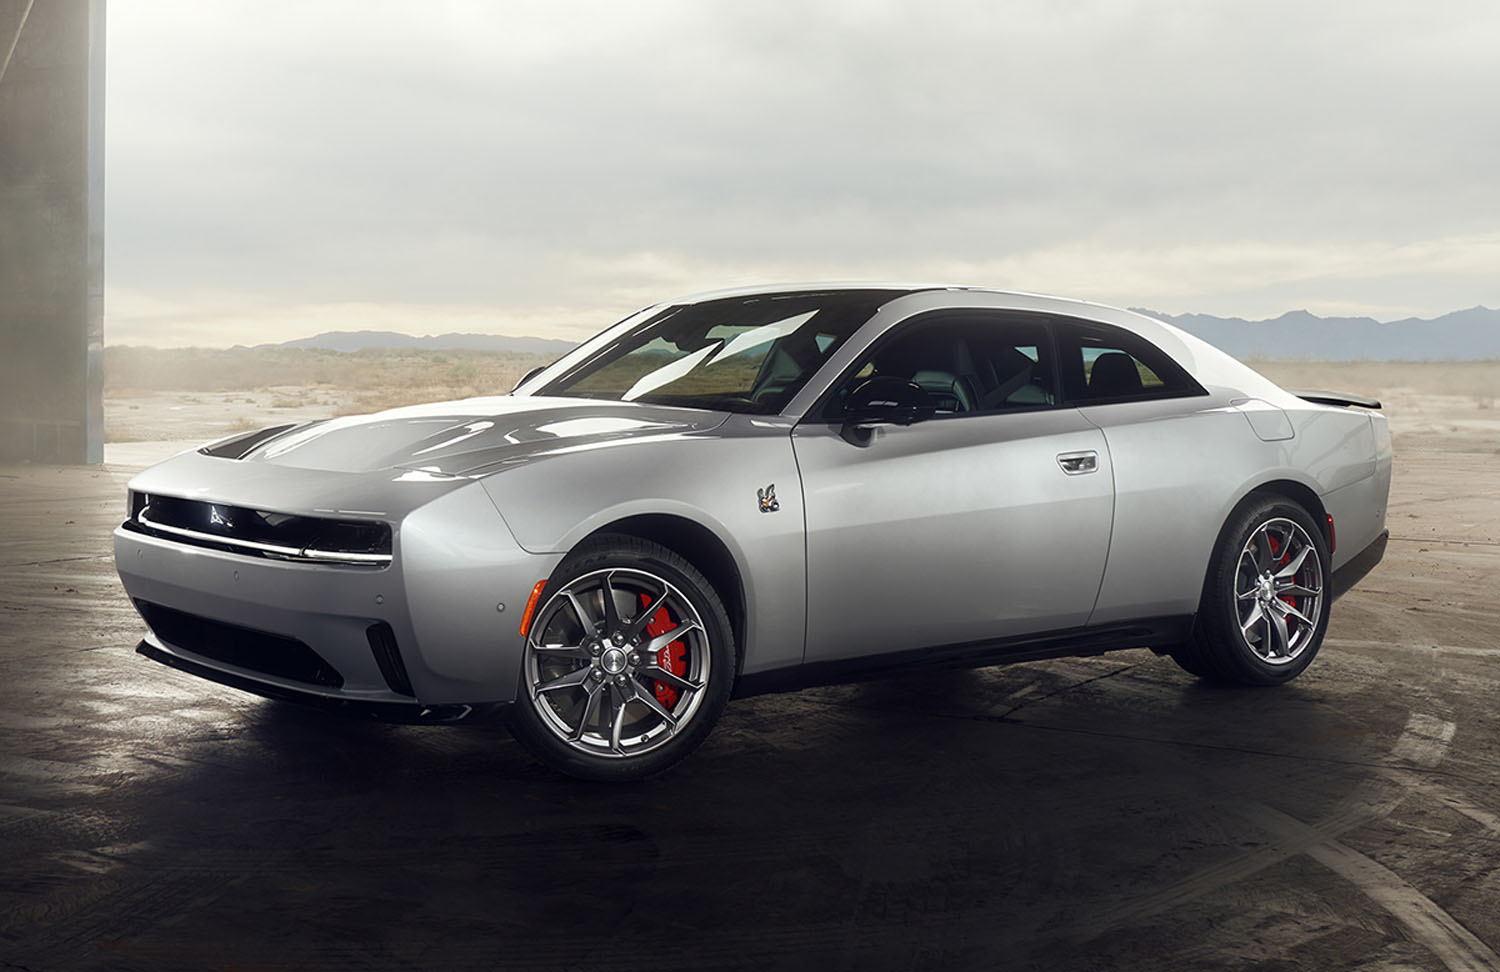 Dodge Continues to Explore Police Package Options for the Upcoming Charger Model